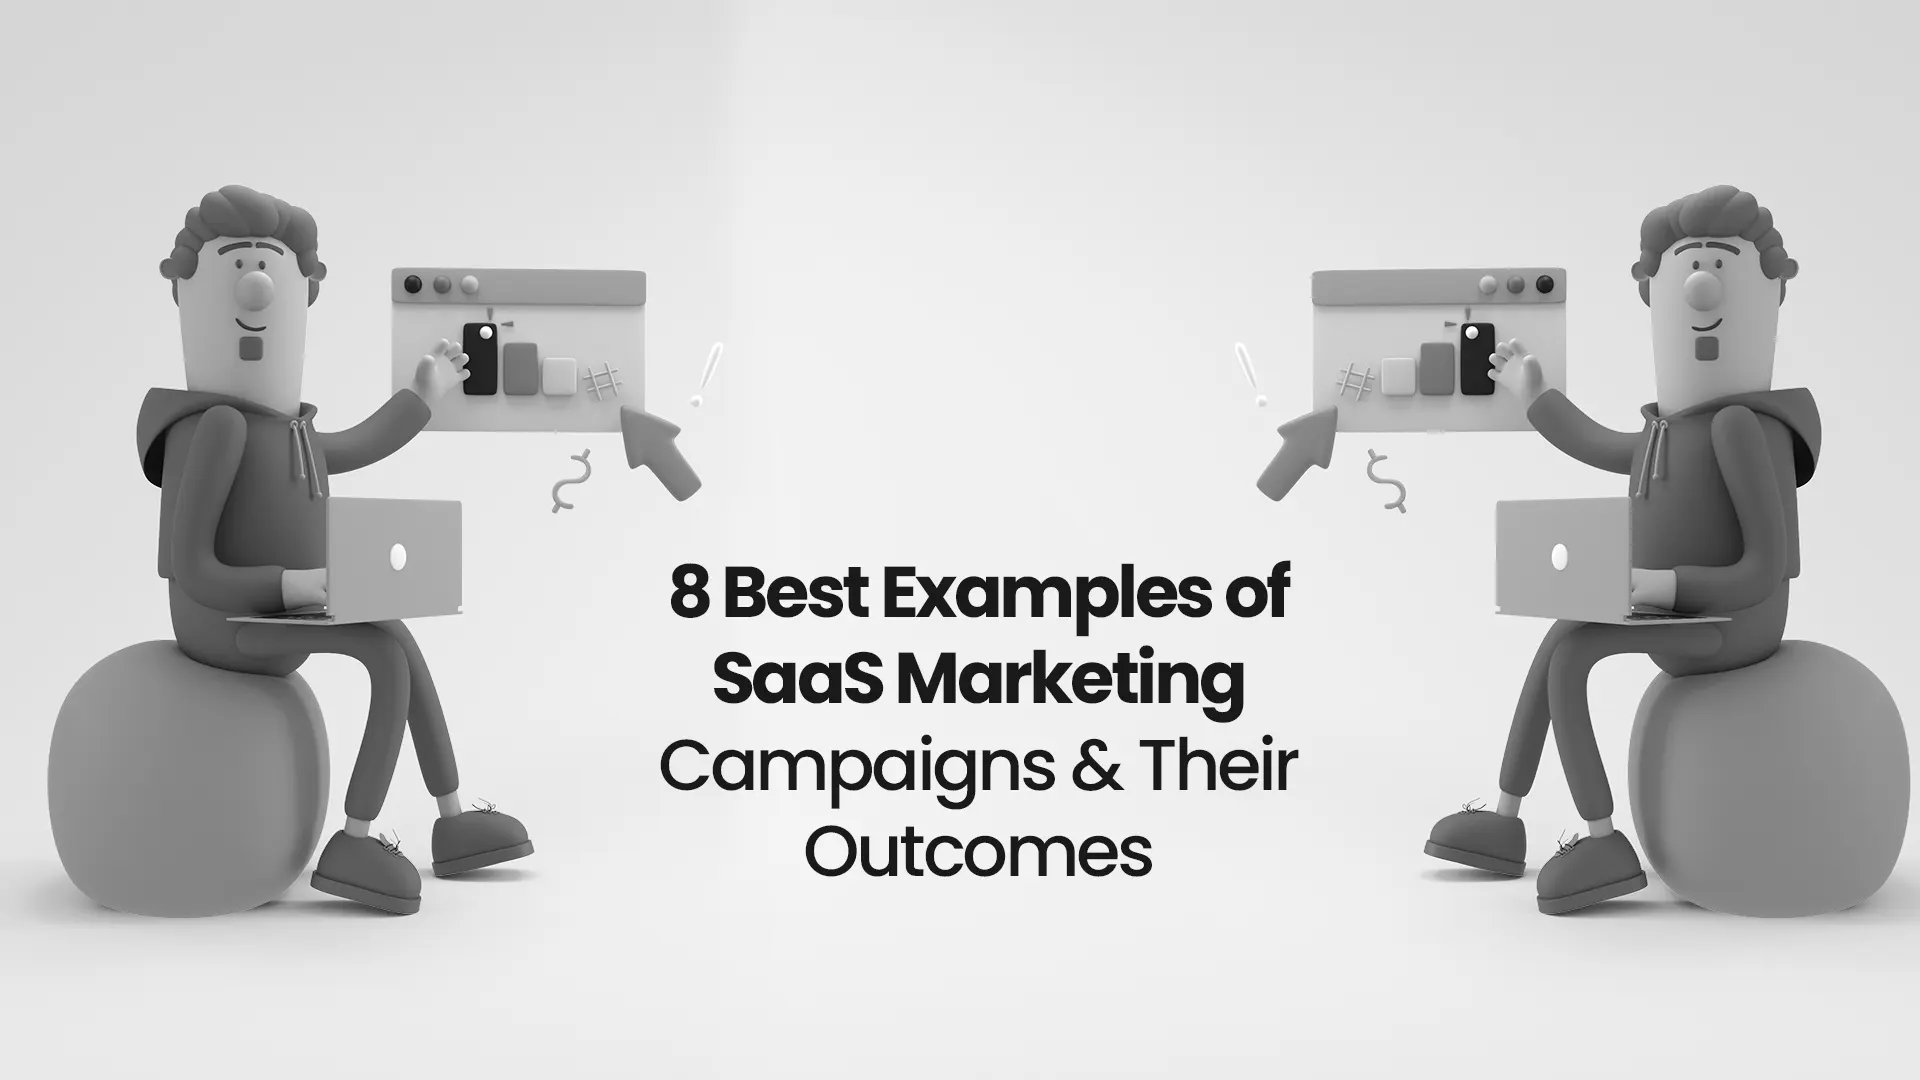 8 Best Examples of SaaS Marketing Campaigns & Their Outcomes